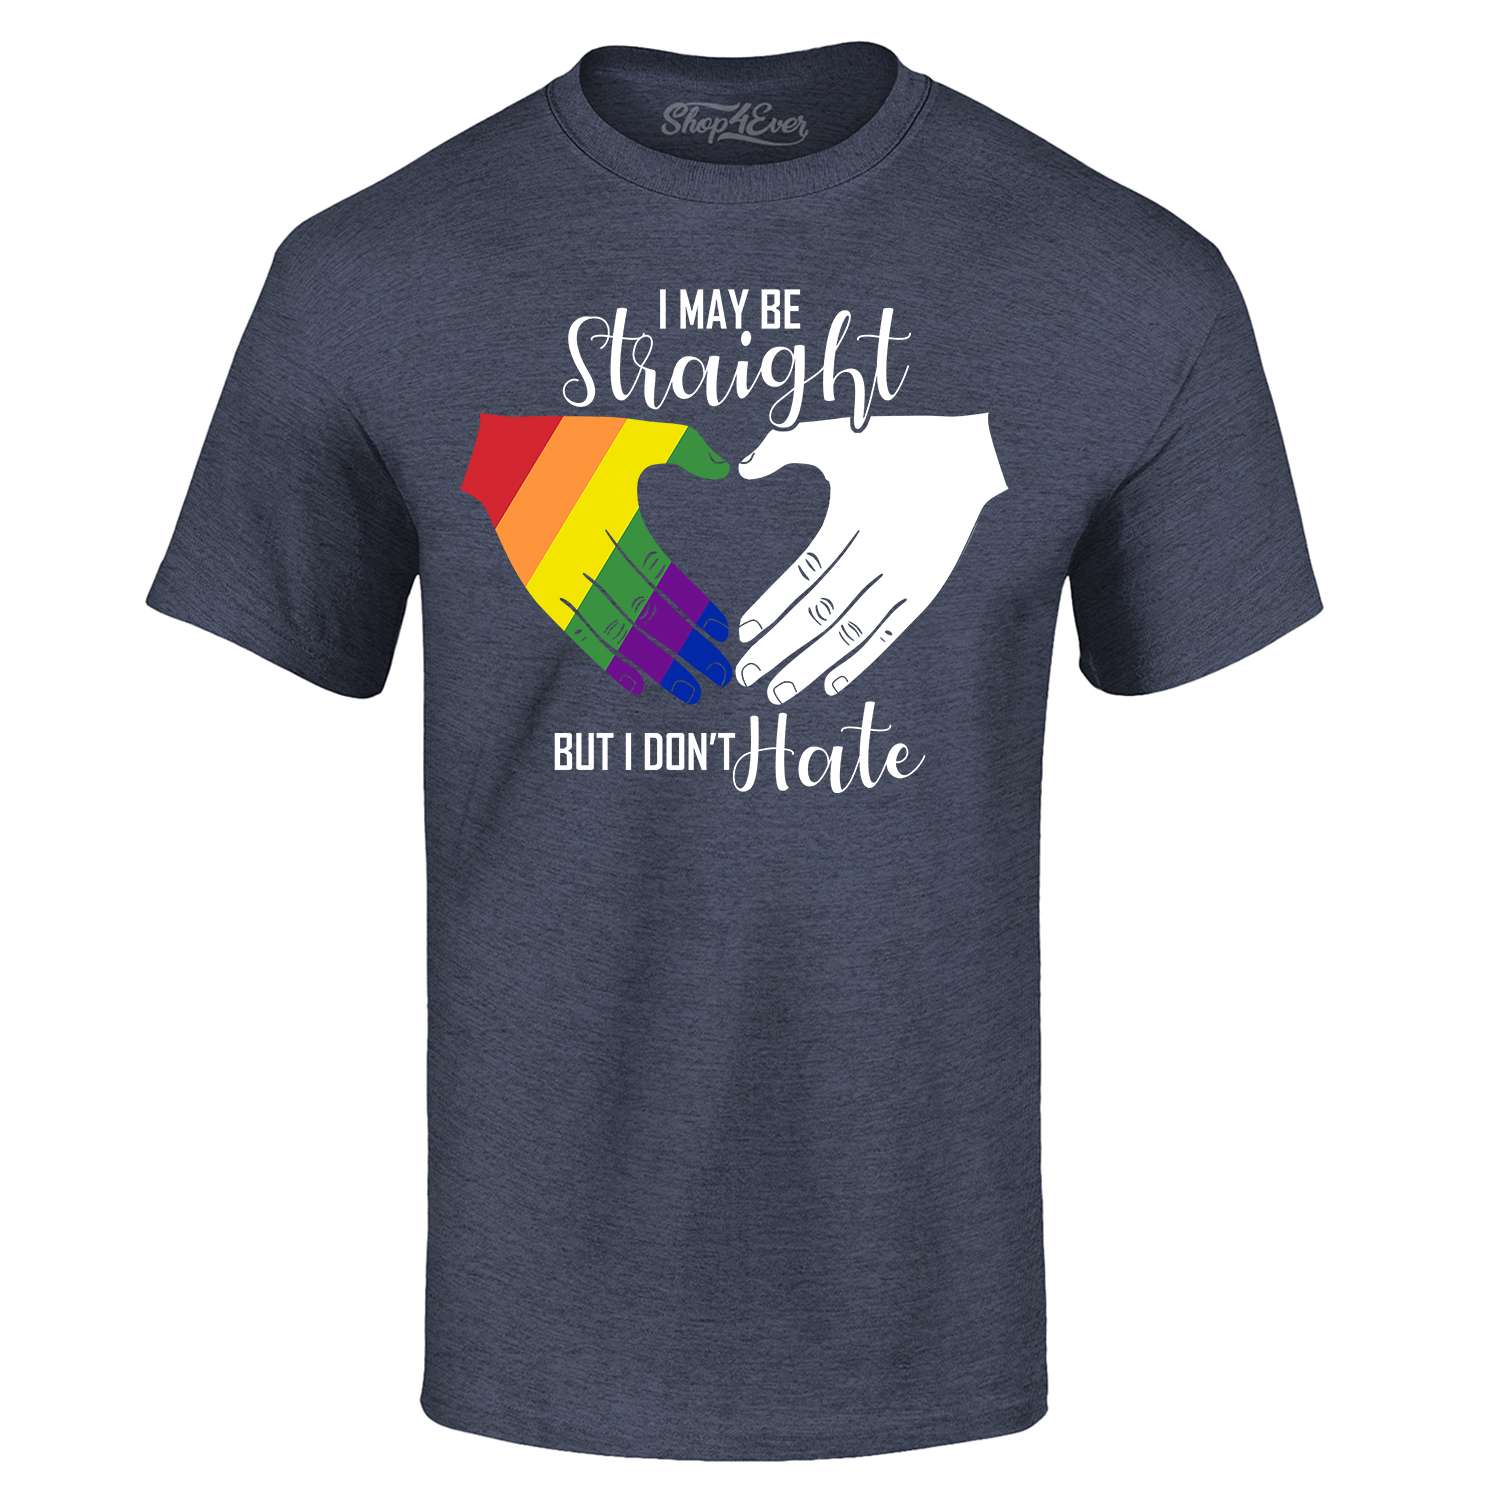 I May Be Straight But I Don't Hate T-shirt Hands Gay Pride Shirts